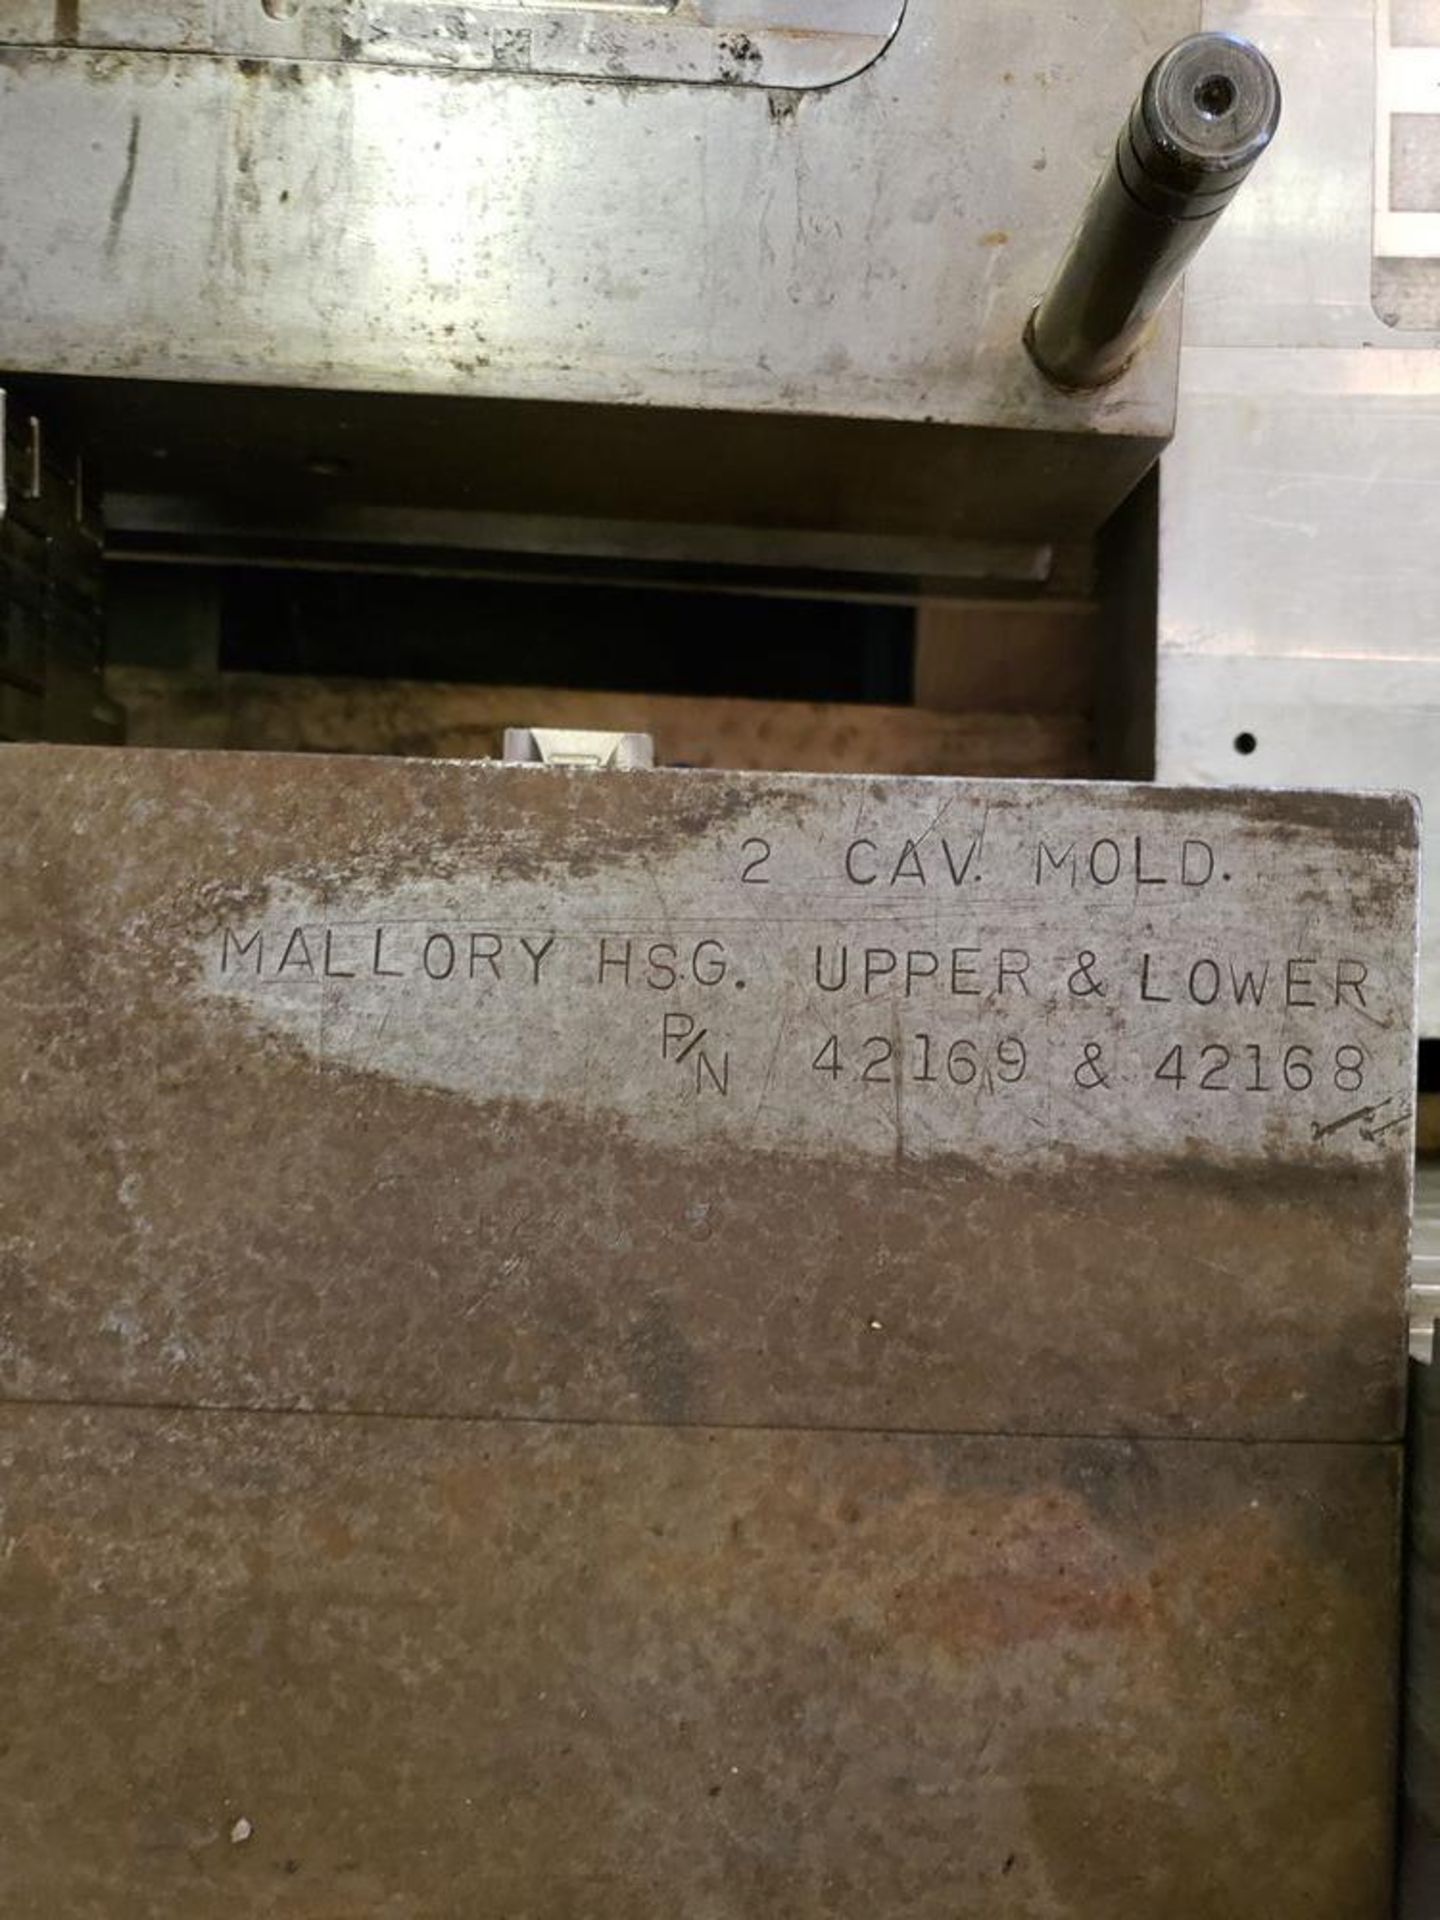 AUTO PART MOLD #42169/42168 MALLORY HSG UPPER & LOWER. EQUIVALENT P/N MALLORY PART# 28720, MALLORY - Image 4 of 4